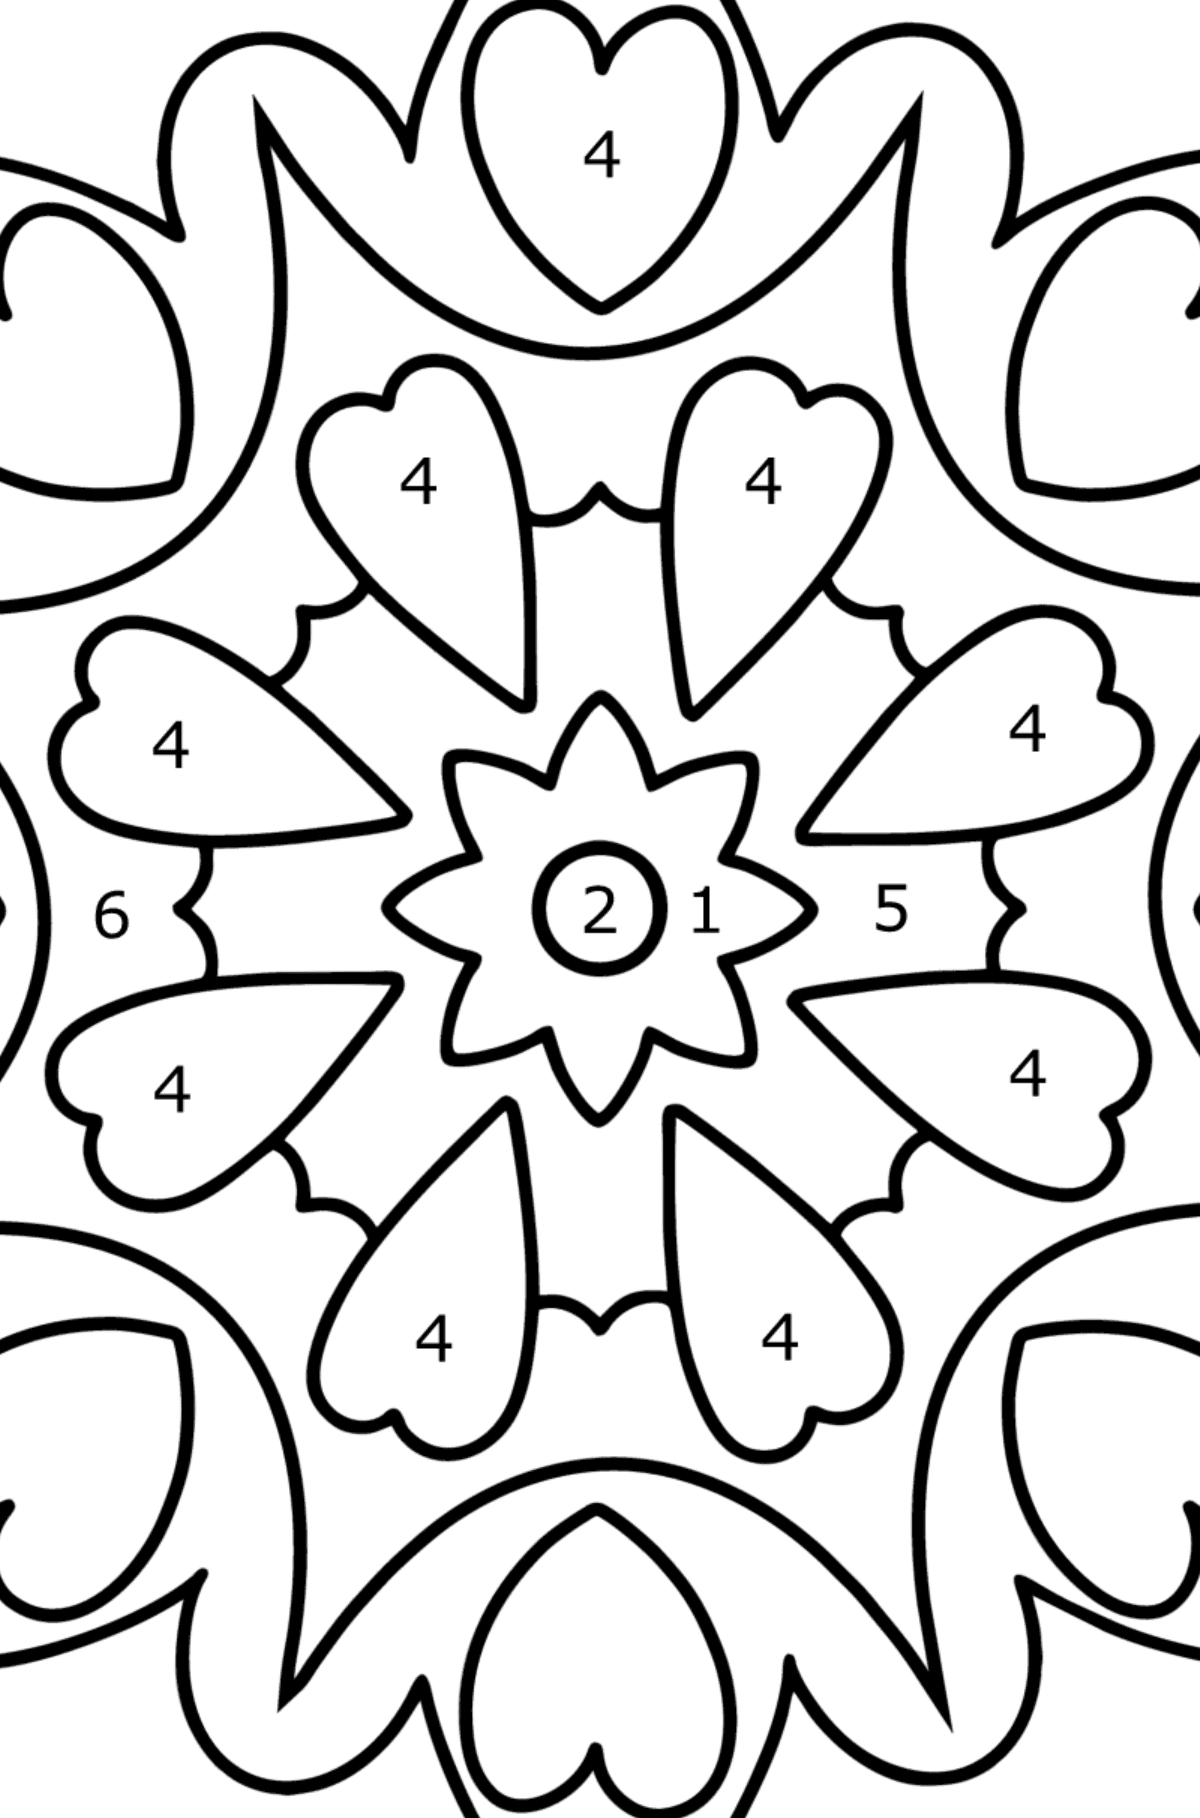 Mandala coloring page - 21 elements - Coloring by Numbers for Kids